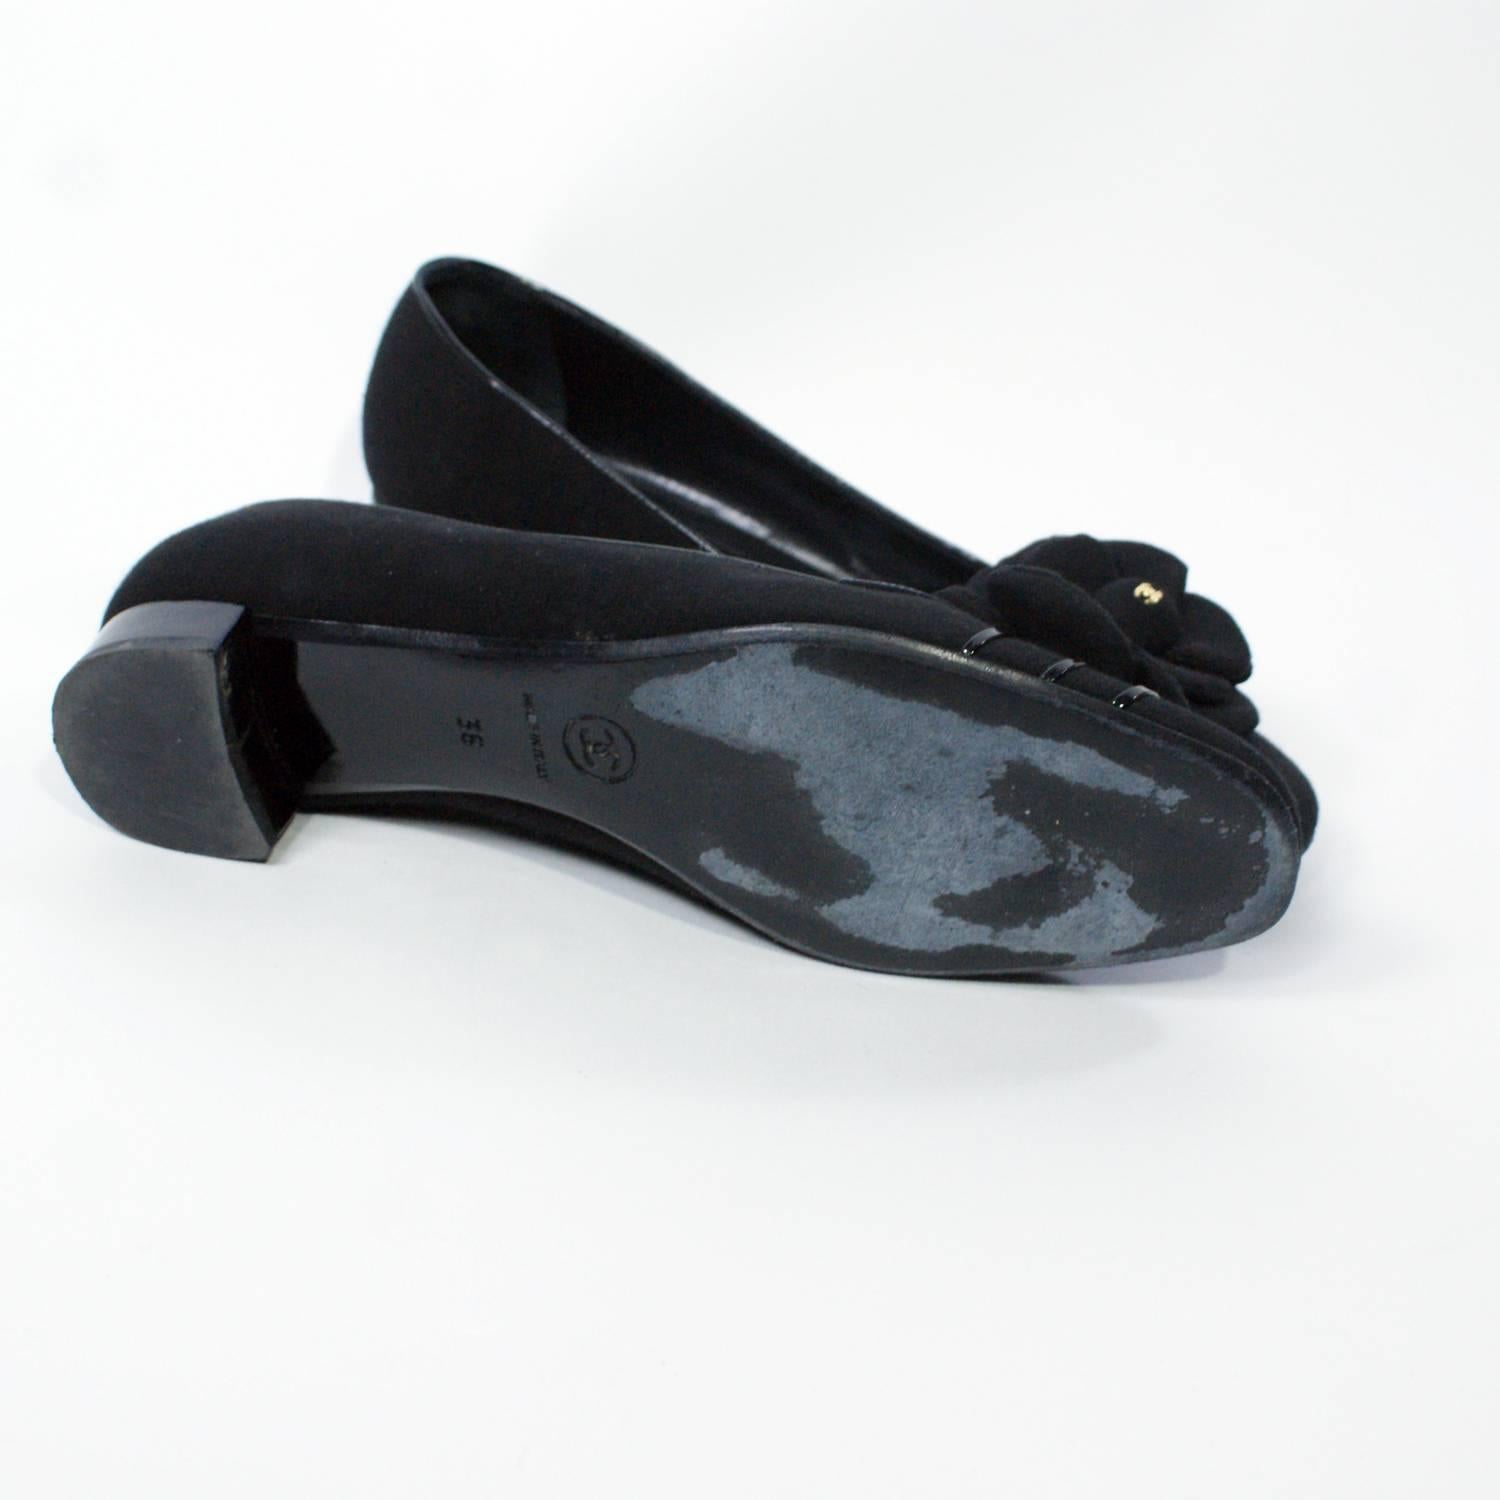 Chanel Black Floral Logo Flats In Excellent Condition For Sale In Narberth, PA